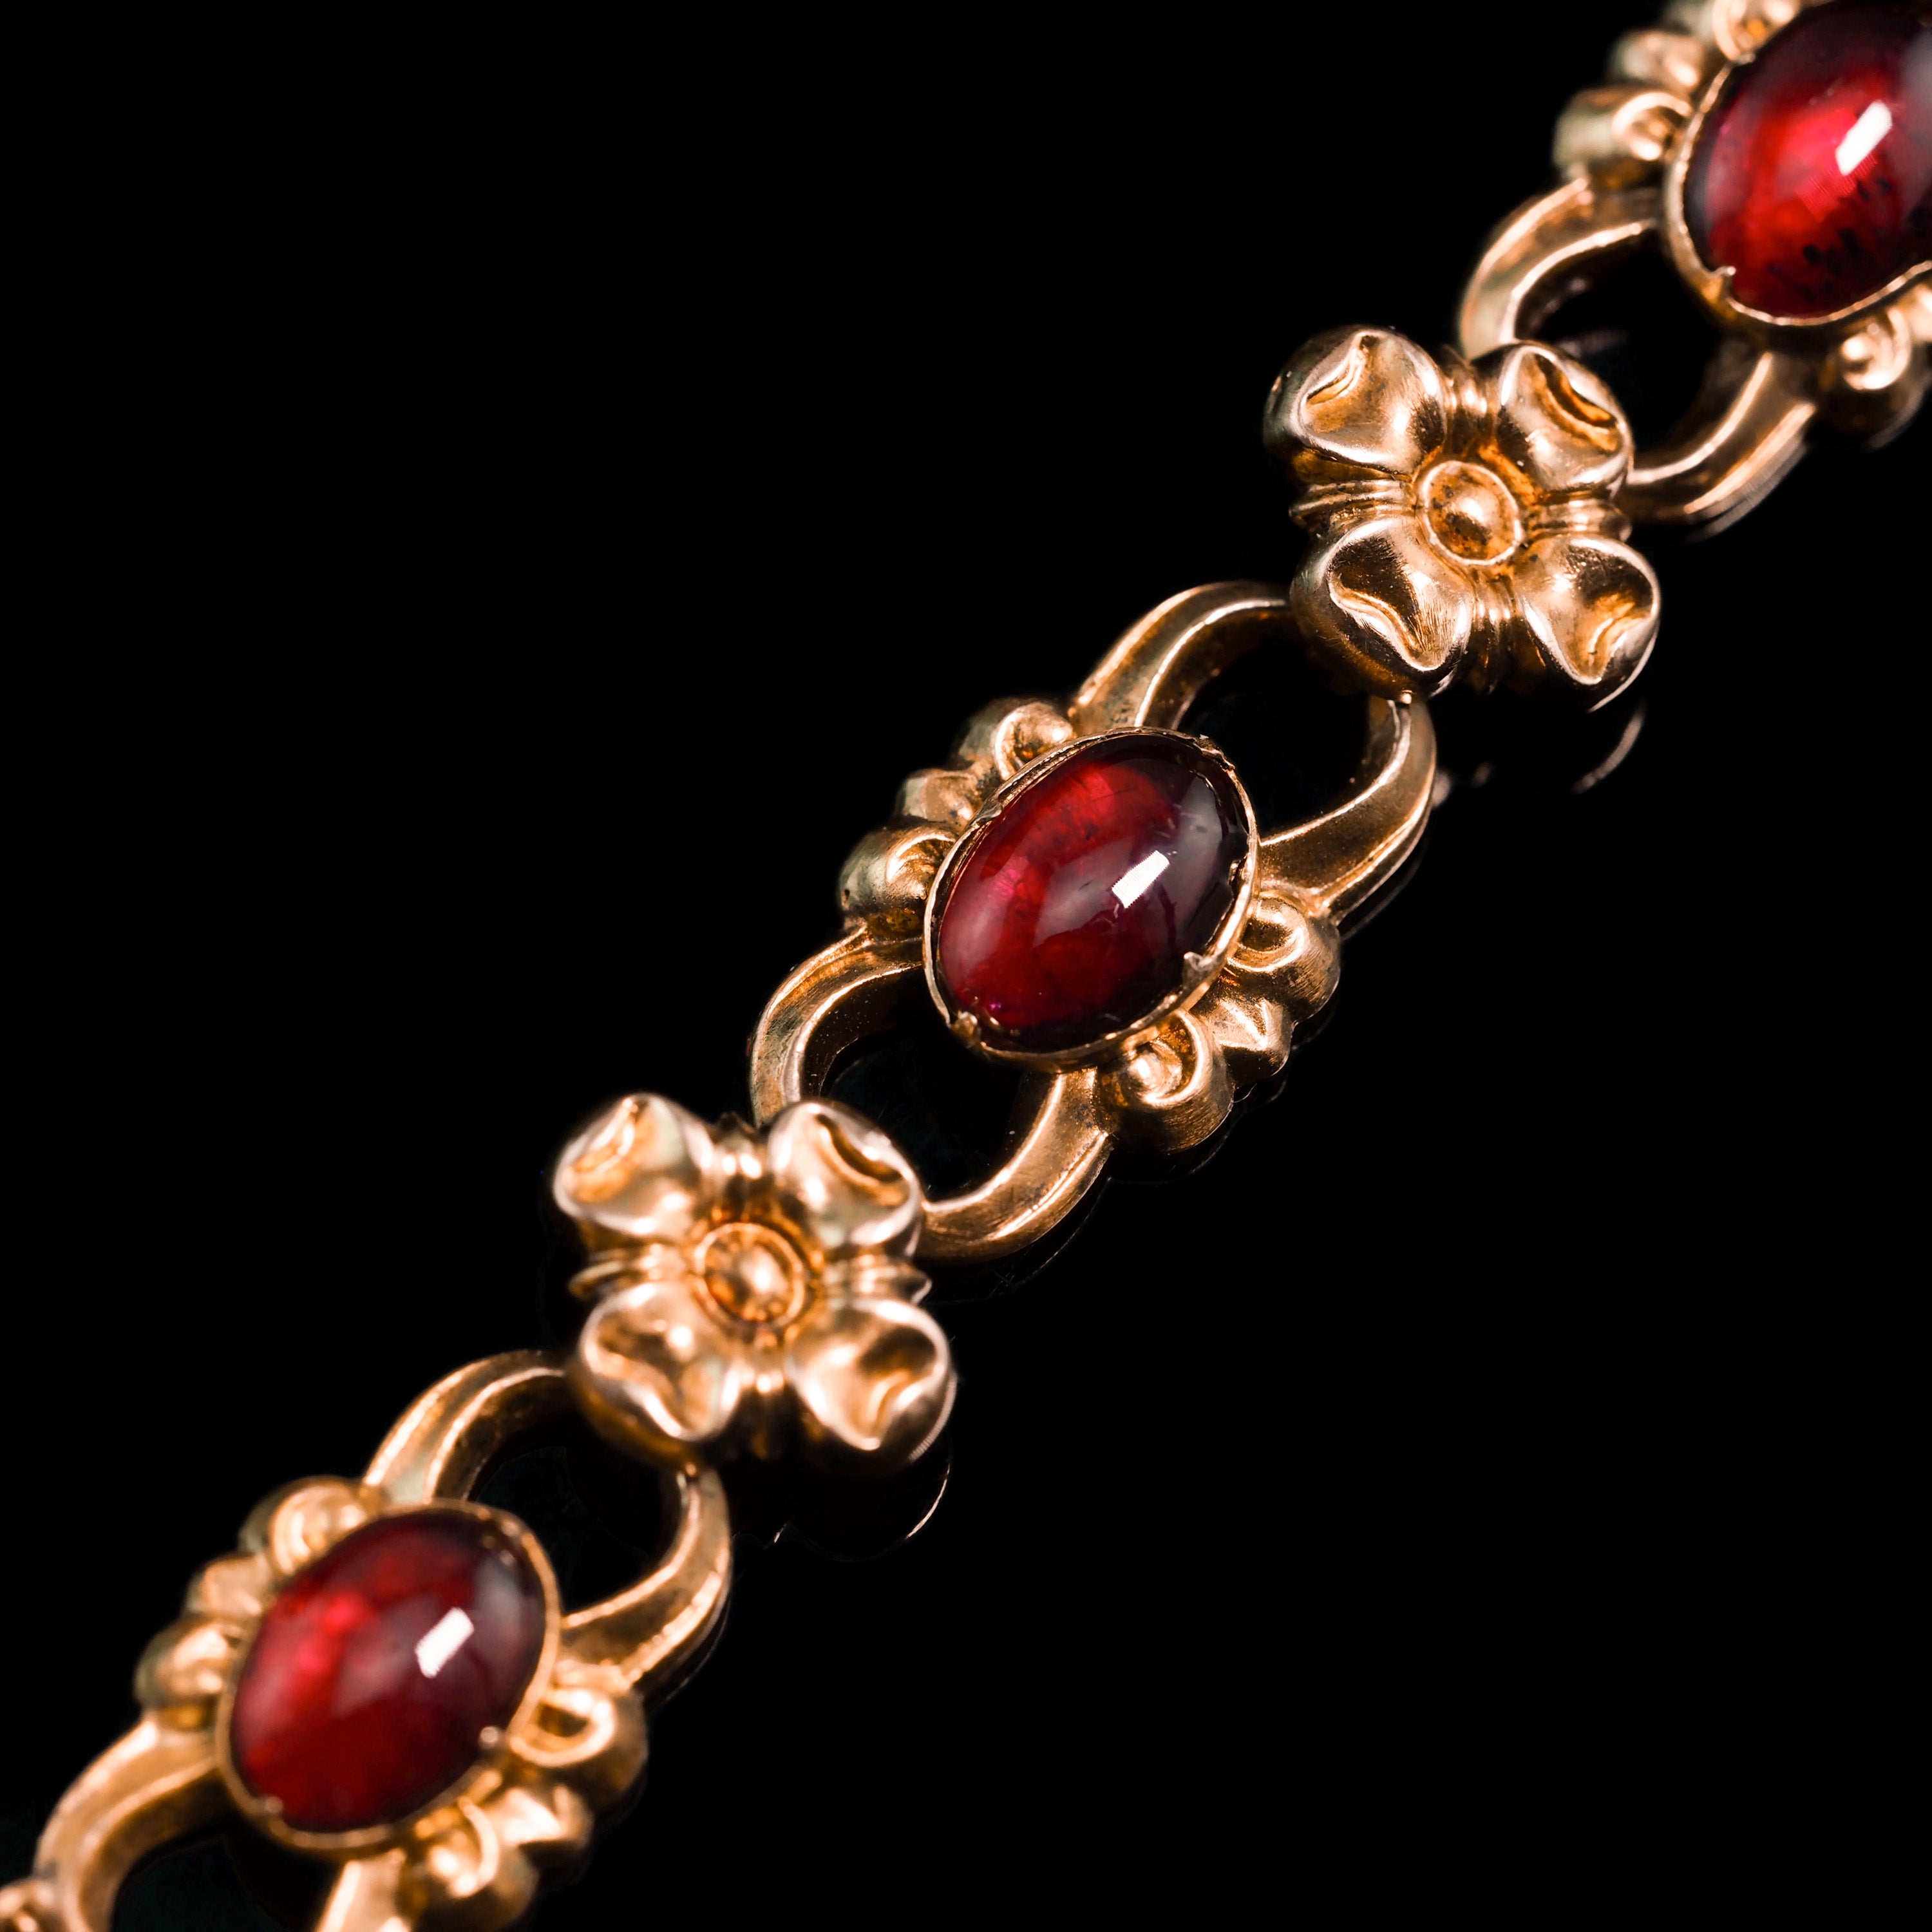 Buy Antique Red Garnet Bracelet, 34 CTW Natural Garnets & 835 Silver,  Collectable Biedermeier Style Jewelry, January Birthstone Online in India -  Etsy